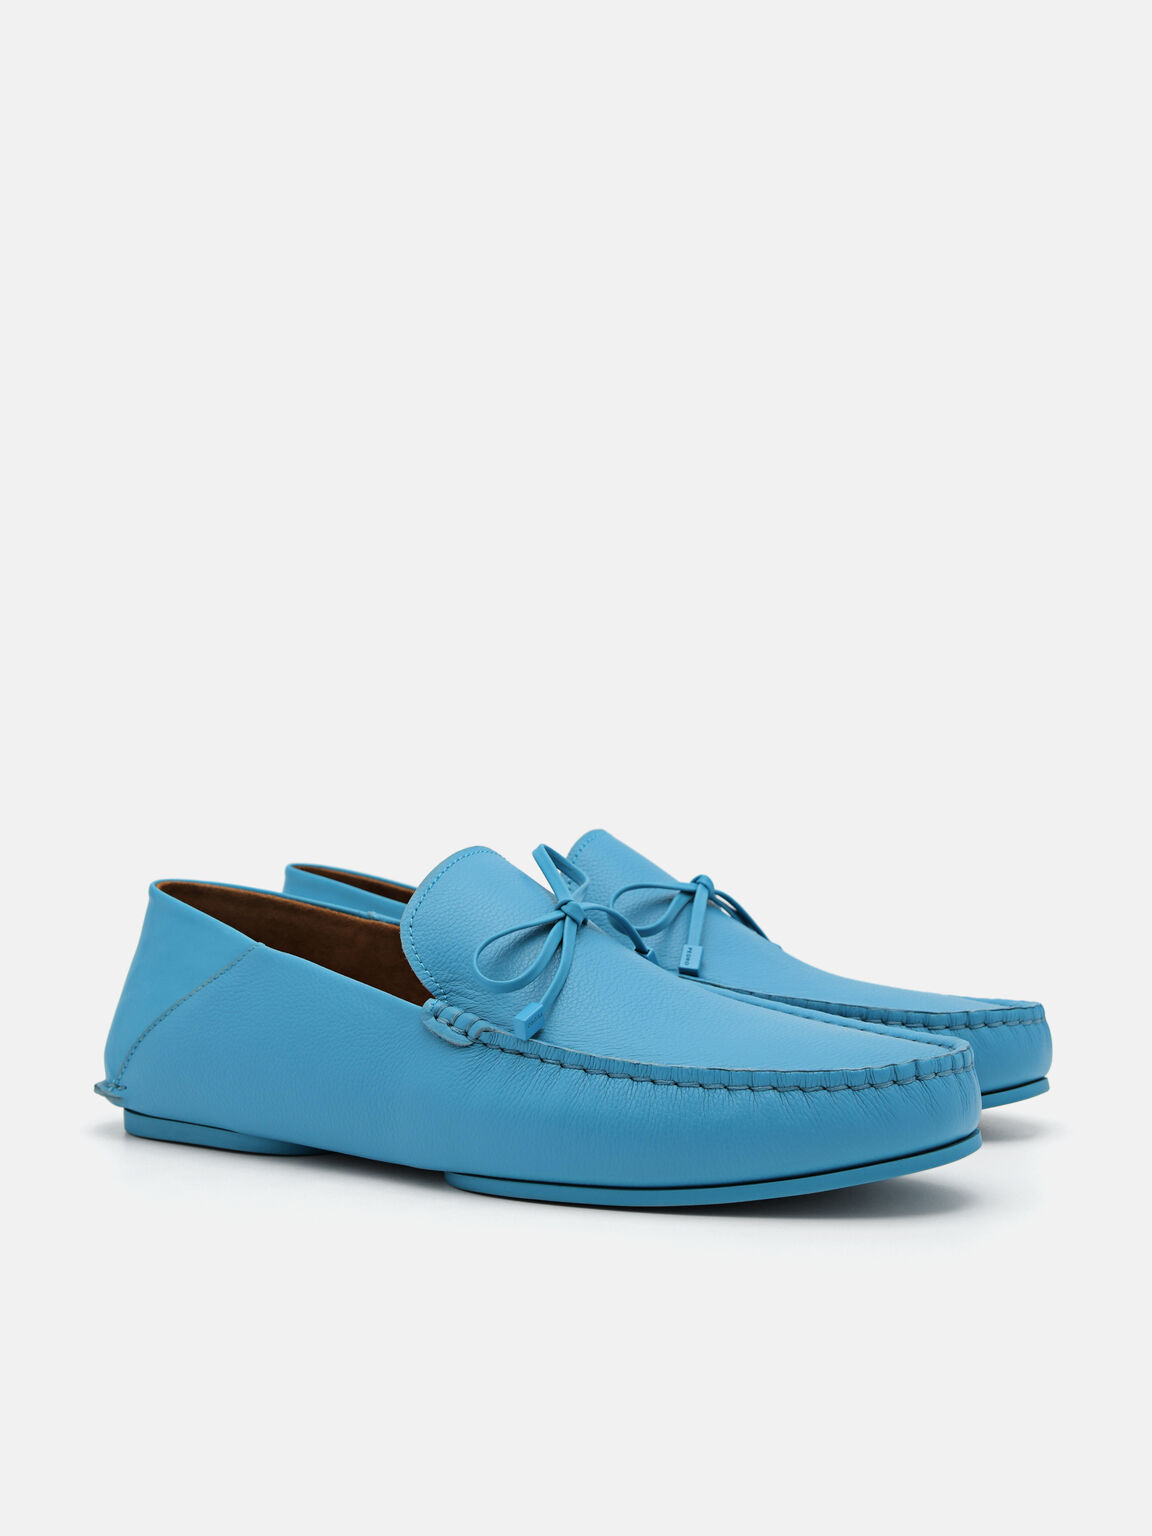 Leto Leather Driving Shoes, Cyan, hi-res